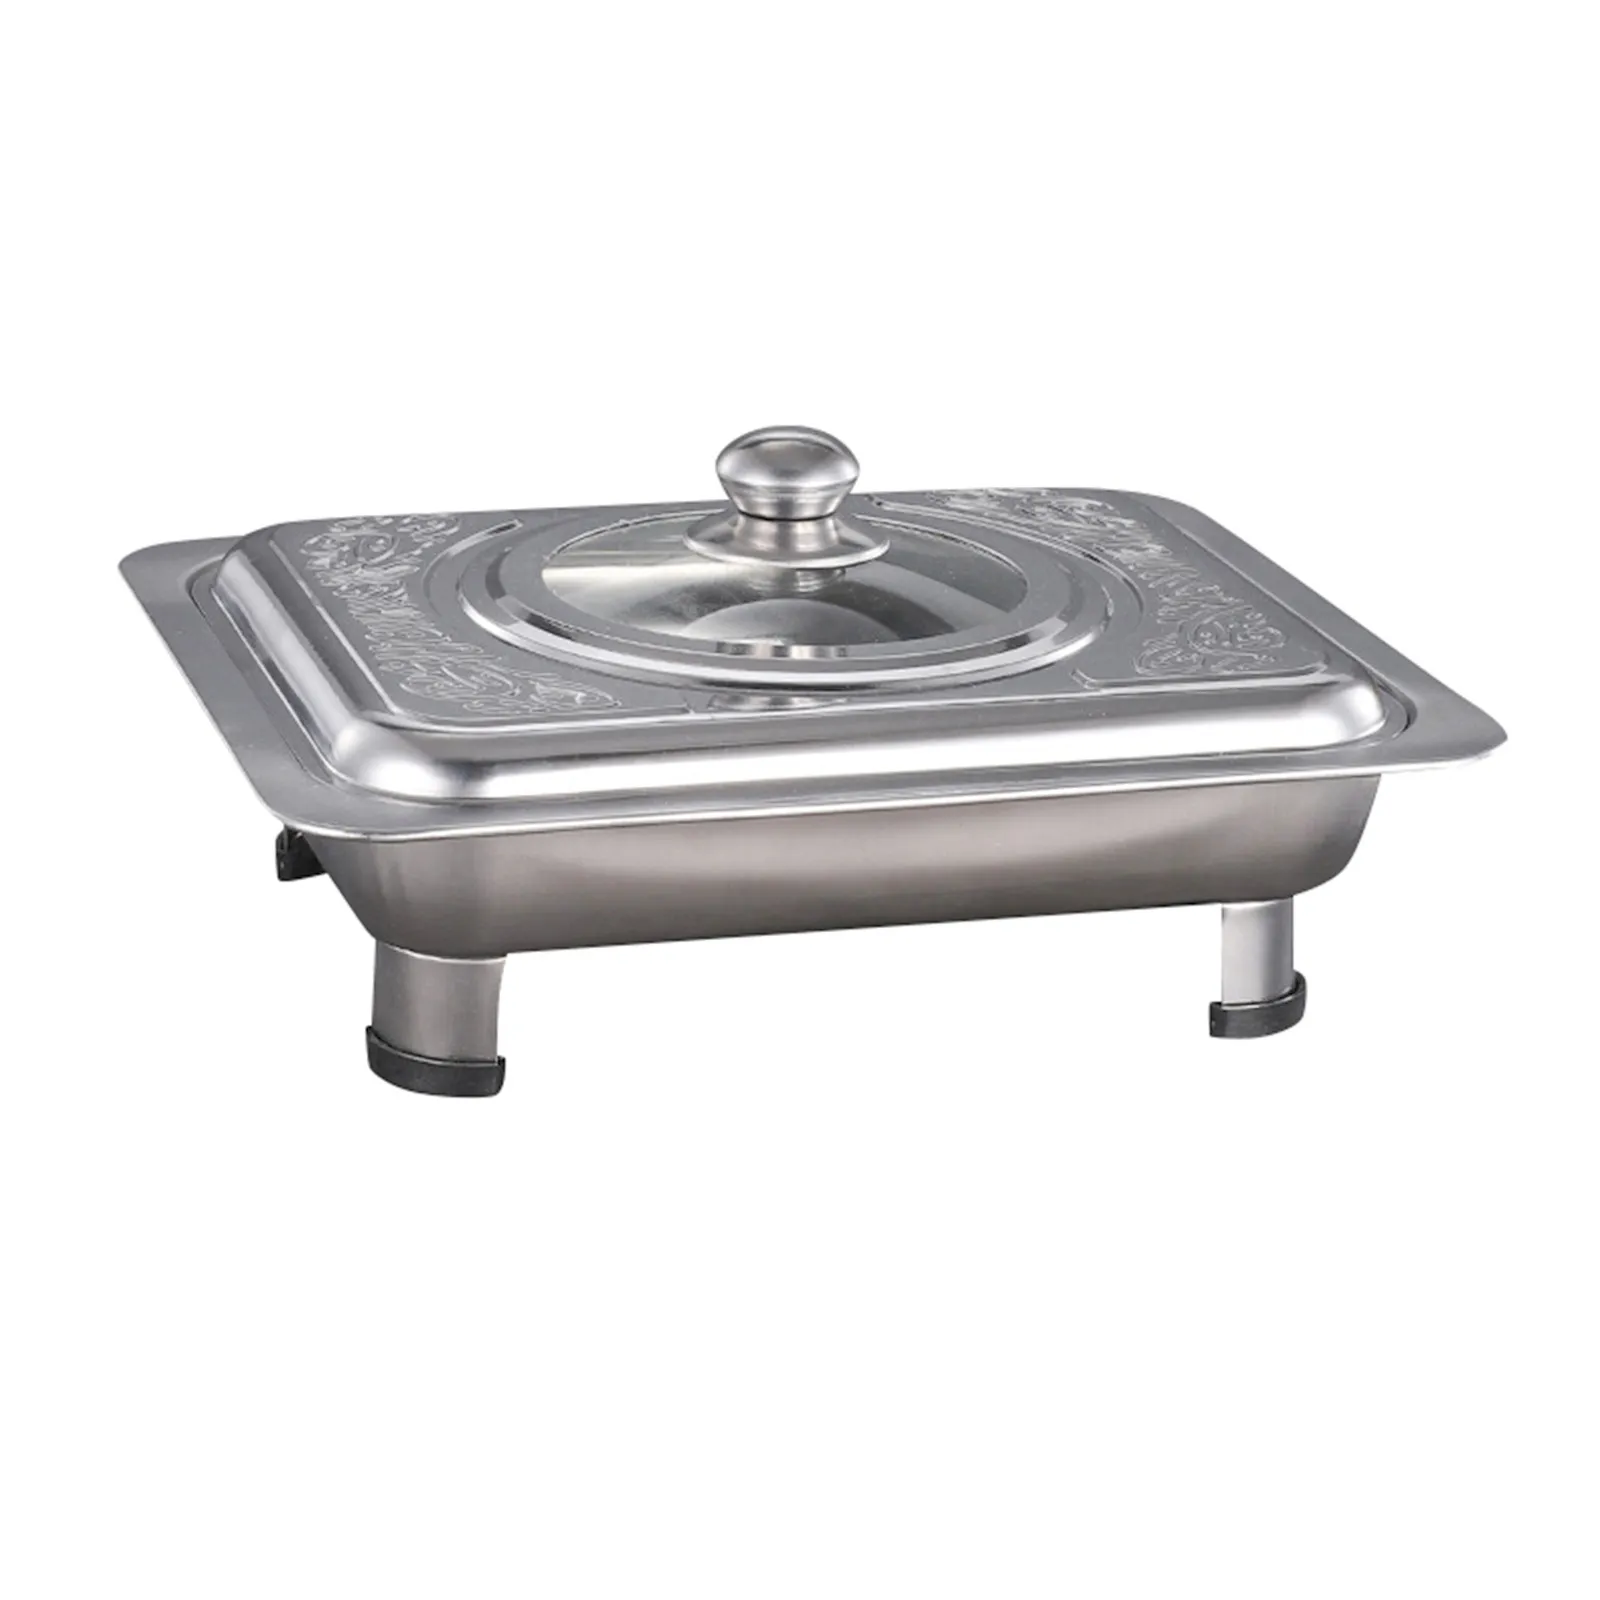 Hot Selling Cooking Utensil Stainless Steel Chafing Dish Catering serving Dish Chafer Cooking Food Warm for food